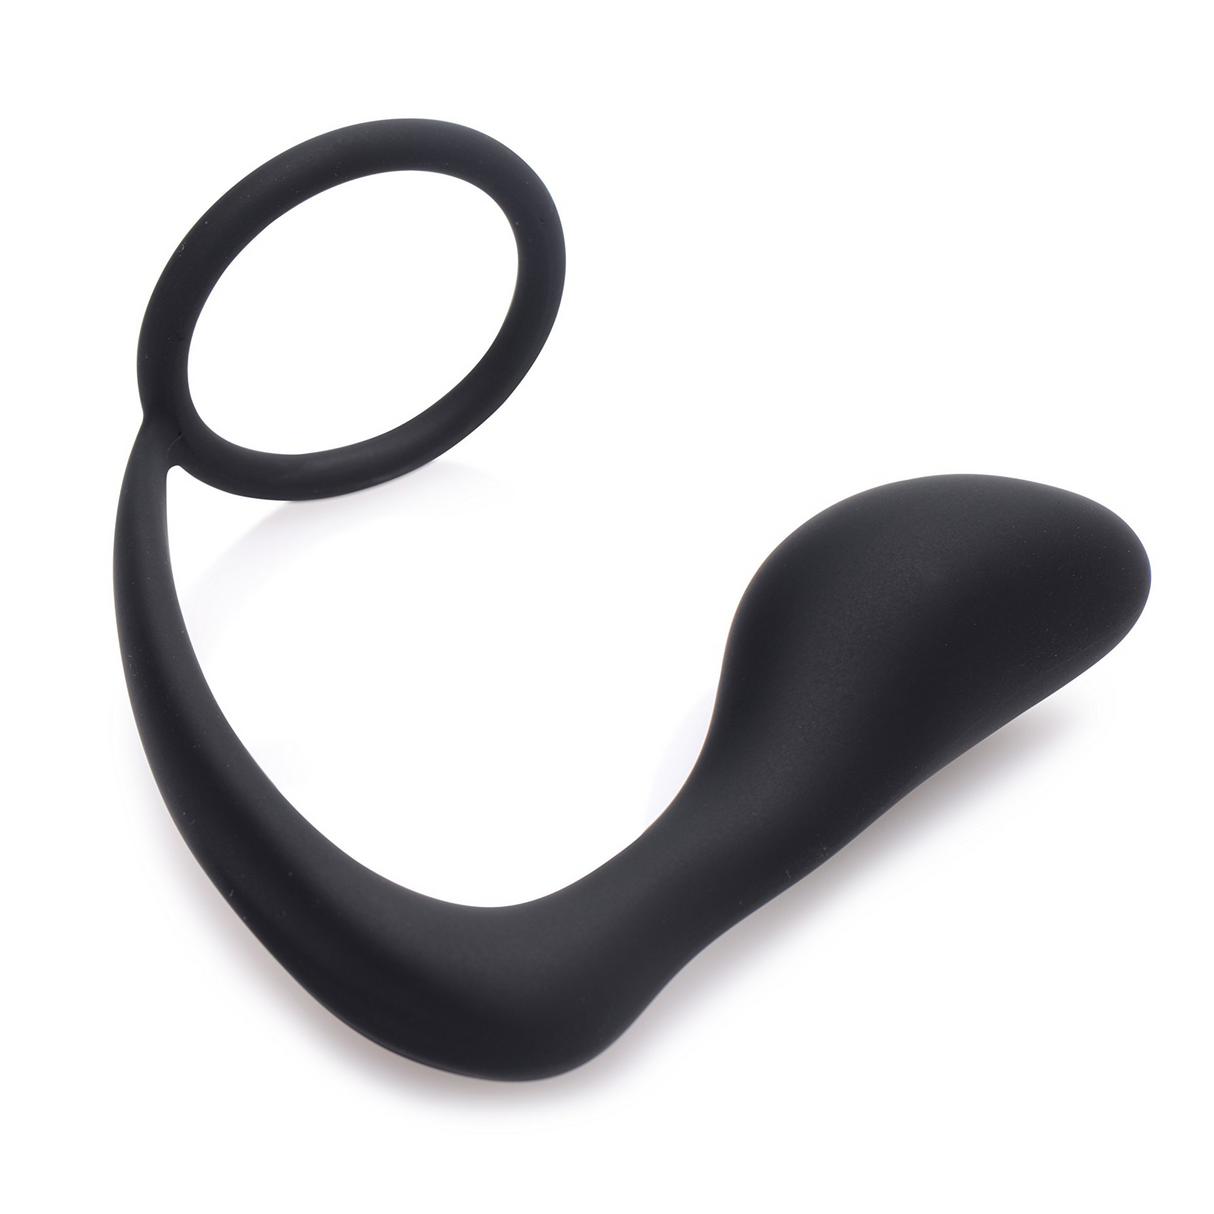 Prostate Stimulator And Cock Ring